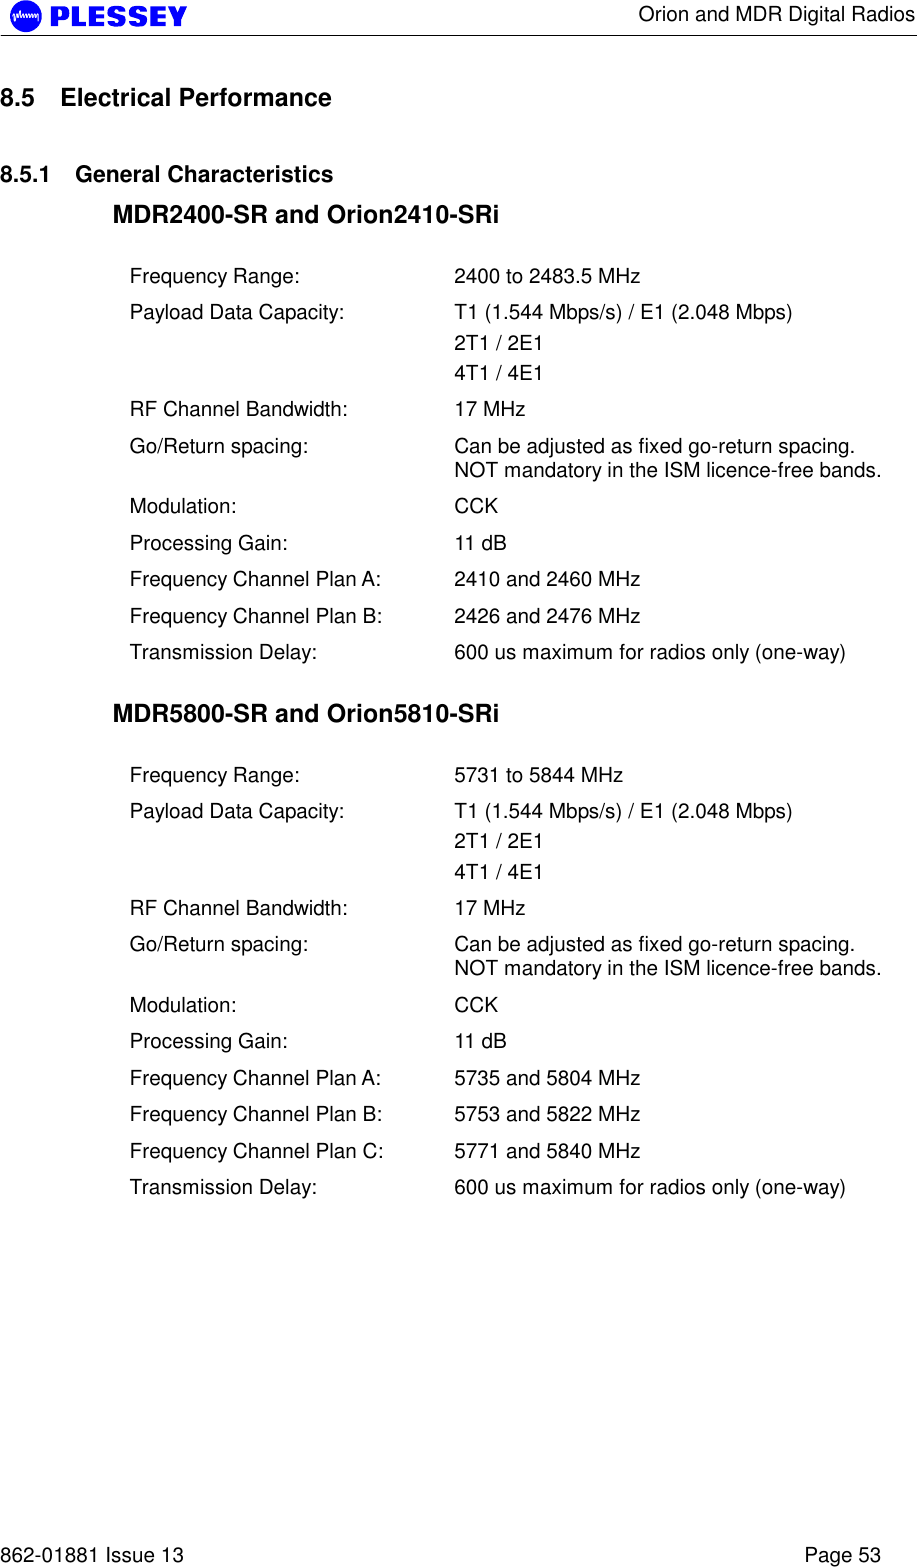      Orion and MDR Digital Radios   862-01881 Issue 13    Page 53 8.5 Electrical Performance 8.5.1 General Characteristics MDR2400-SR and Orion2410-SRi  Frequency Range:  2400 to 2483.5 MHz Payload Data Capacity:  T1 (1.544 Mbps/s) / E1 (2.048 Mbps) 2T1 / 2E1  4T1 / 4E1  RF Channel Bandwidth:  17 MHz Go/Return spacing:  Can be adjusted as fixed go-return spacing. NOT mandatory in the ISM licence-free bands.   Modulation: CCK Processing Gain:  11 dB Frequency Channel Plan A:  2410 and 2460 MHz Frequency Channel Plan B:  2426 and 2476 MHz Transmission Delay:  600 us maximum for radios only (one-way)  MDR5800-SR and Orion5810-SRi  Frequency Range:  5731 to 5844 MHz Payload Data Capacity:  T1 (1.544 Mbps/s) / E1 (2.048 Mbps) 2T1 / 2E1  4T1 / 4E1   RF Channel Bandwidth:  17 MHz Go/Return spacing:  Can be adjusted as fixed go-return spacing. NOT mandatory in the ISM licence-free bands.   Modulation: CCK Processing Gain:  11 dB Frequency Channel Plan A:  5735 and 5804 MHz Frequency Channel Plan B:  5753 and 5822 MHz Frequency Channel Plan C:  5771 and 5840 MHz Transmission Delay:  600 us maximum for radios only (one-way)  